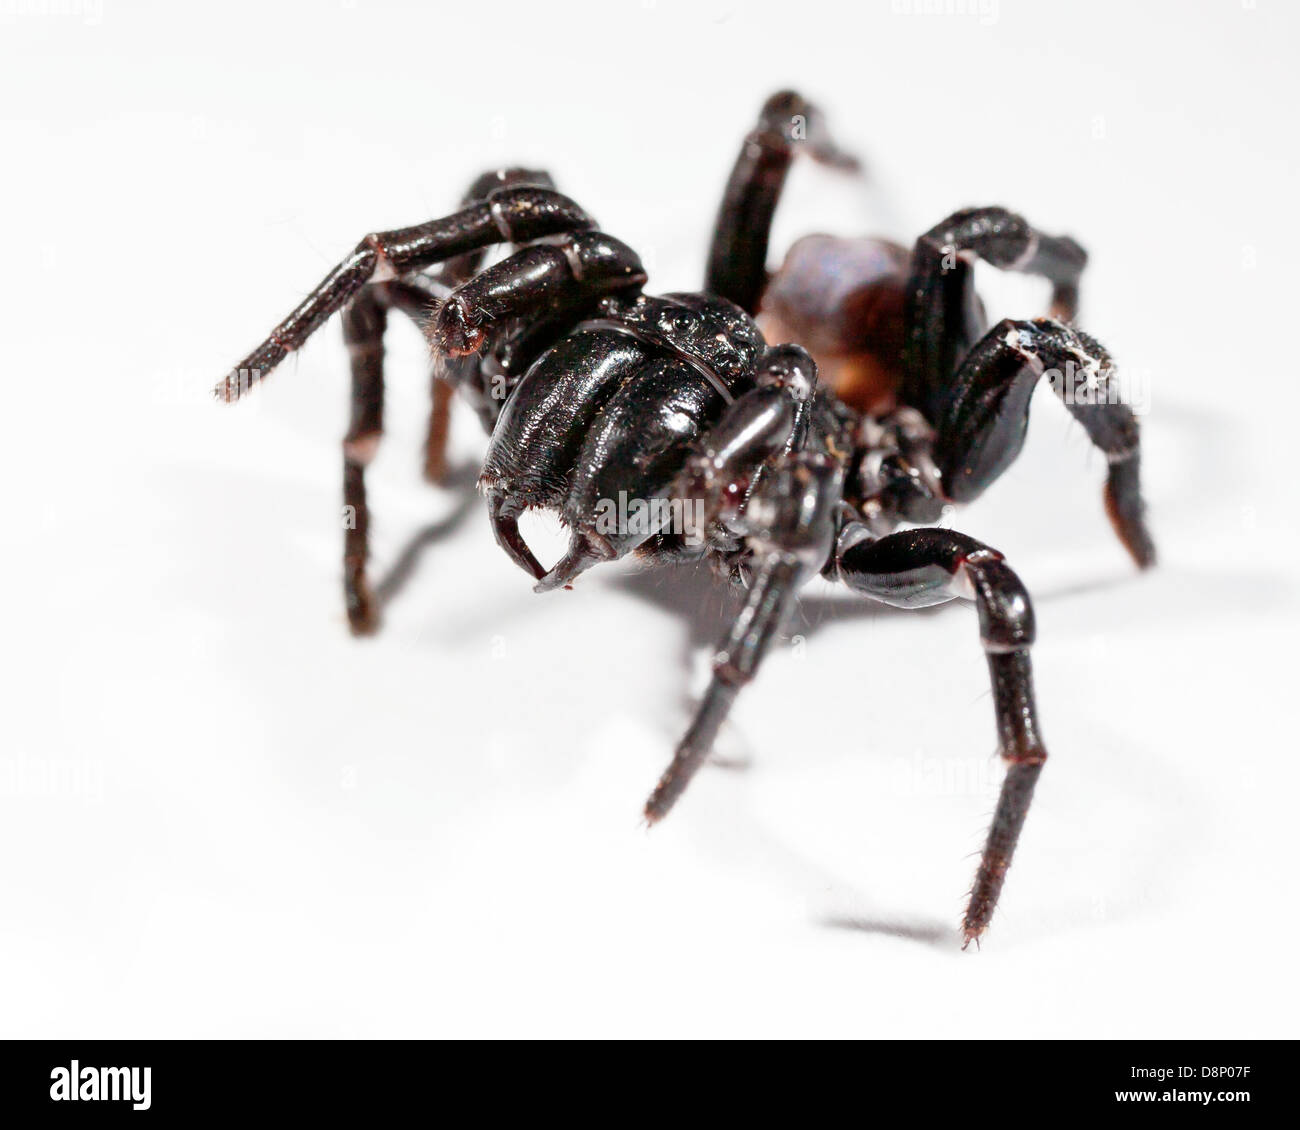 a funnel web spider rearing up Stock Photo